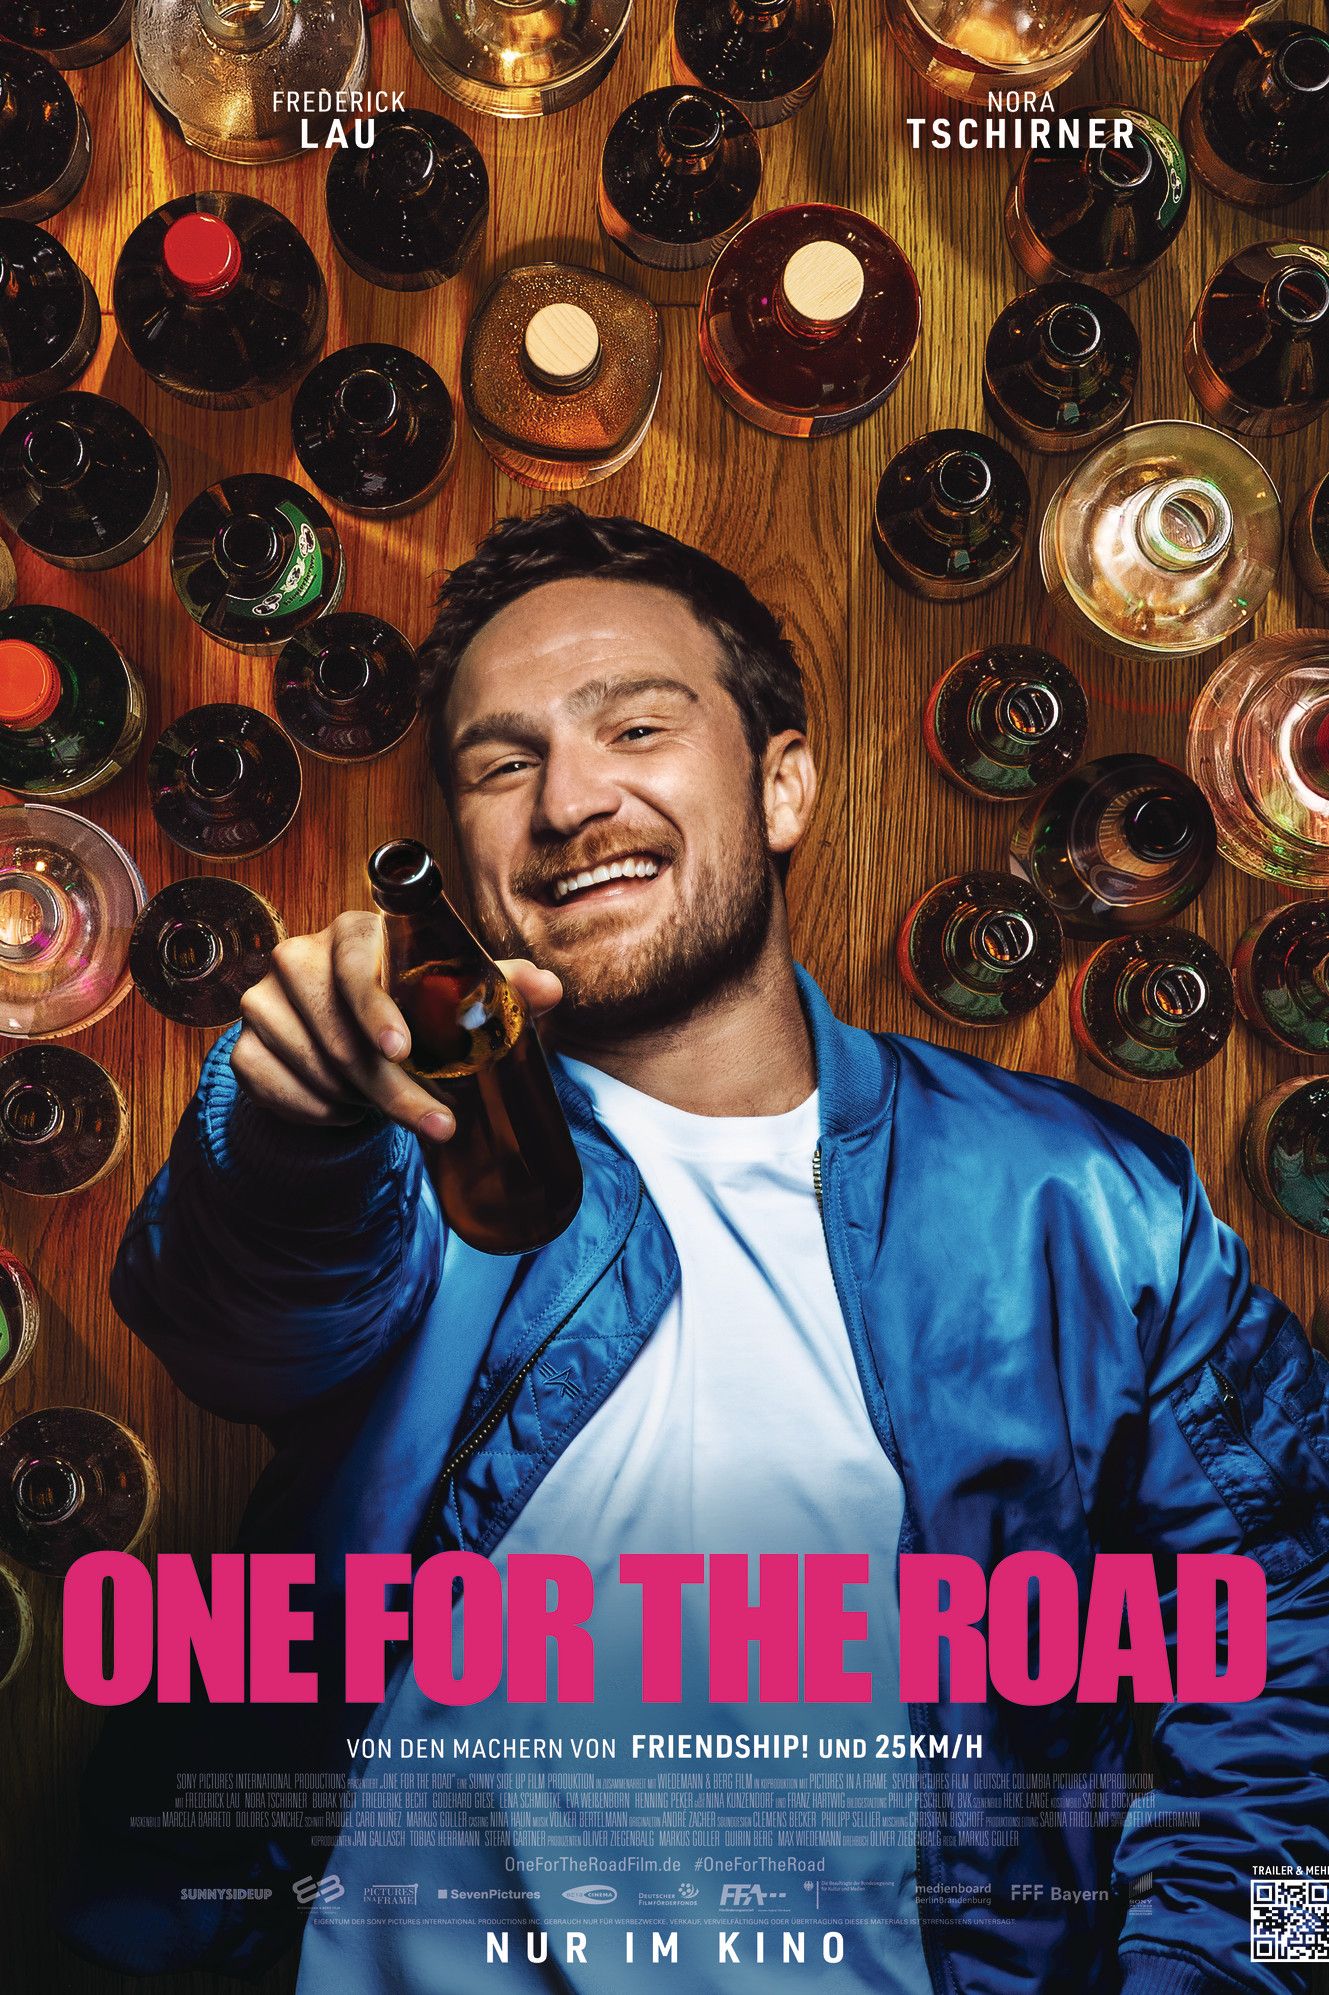 One for the Road Movie Information & Trailers